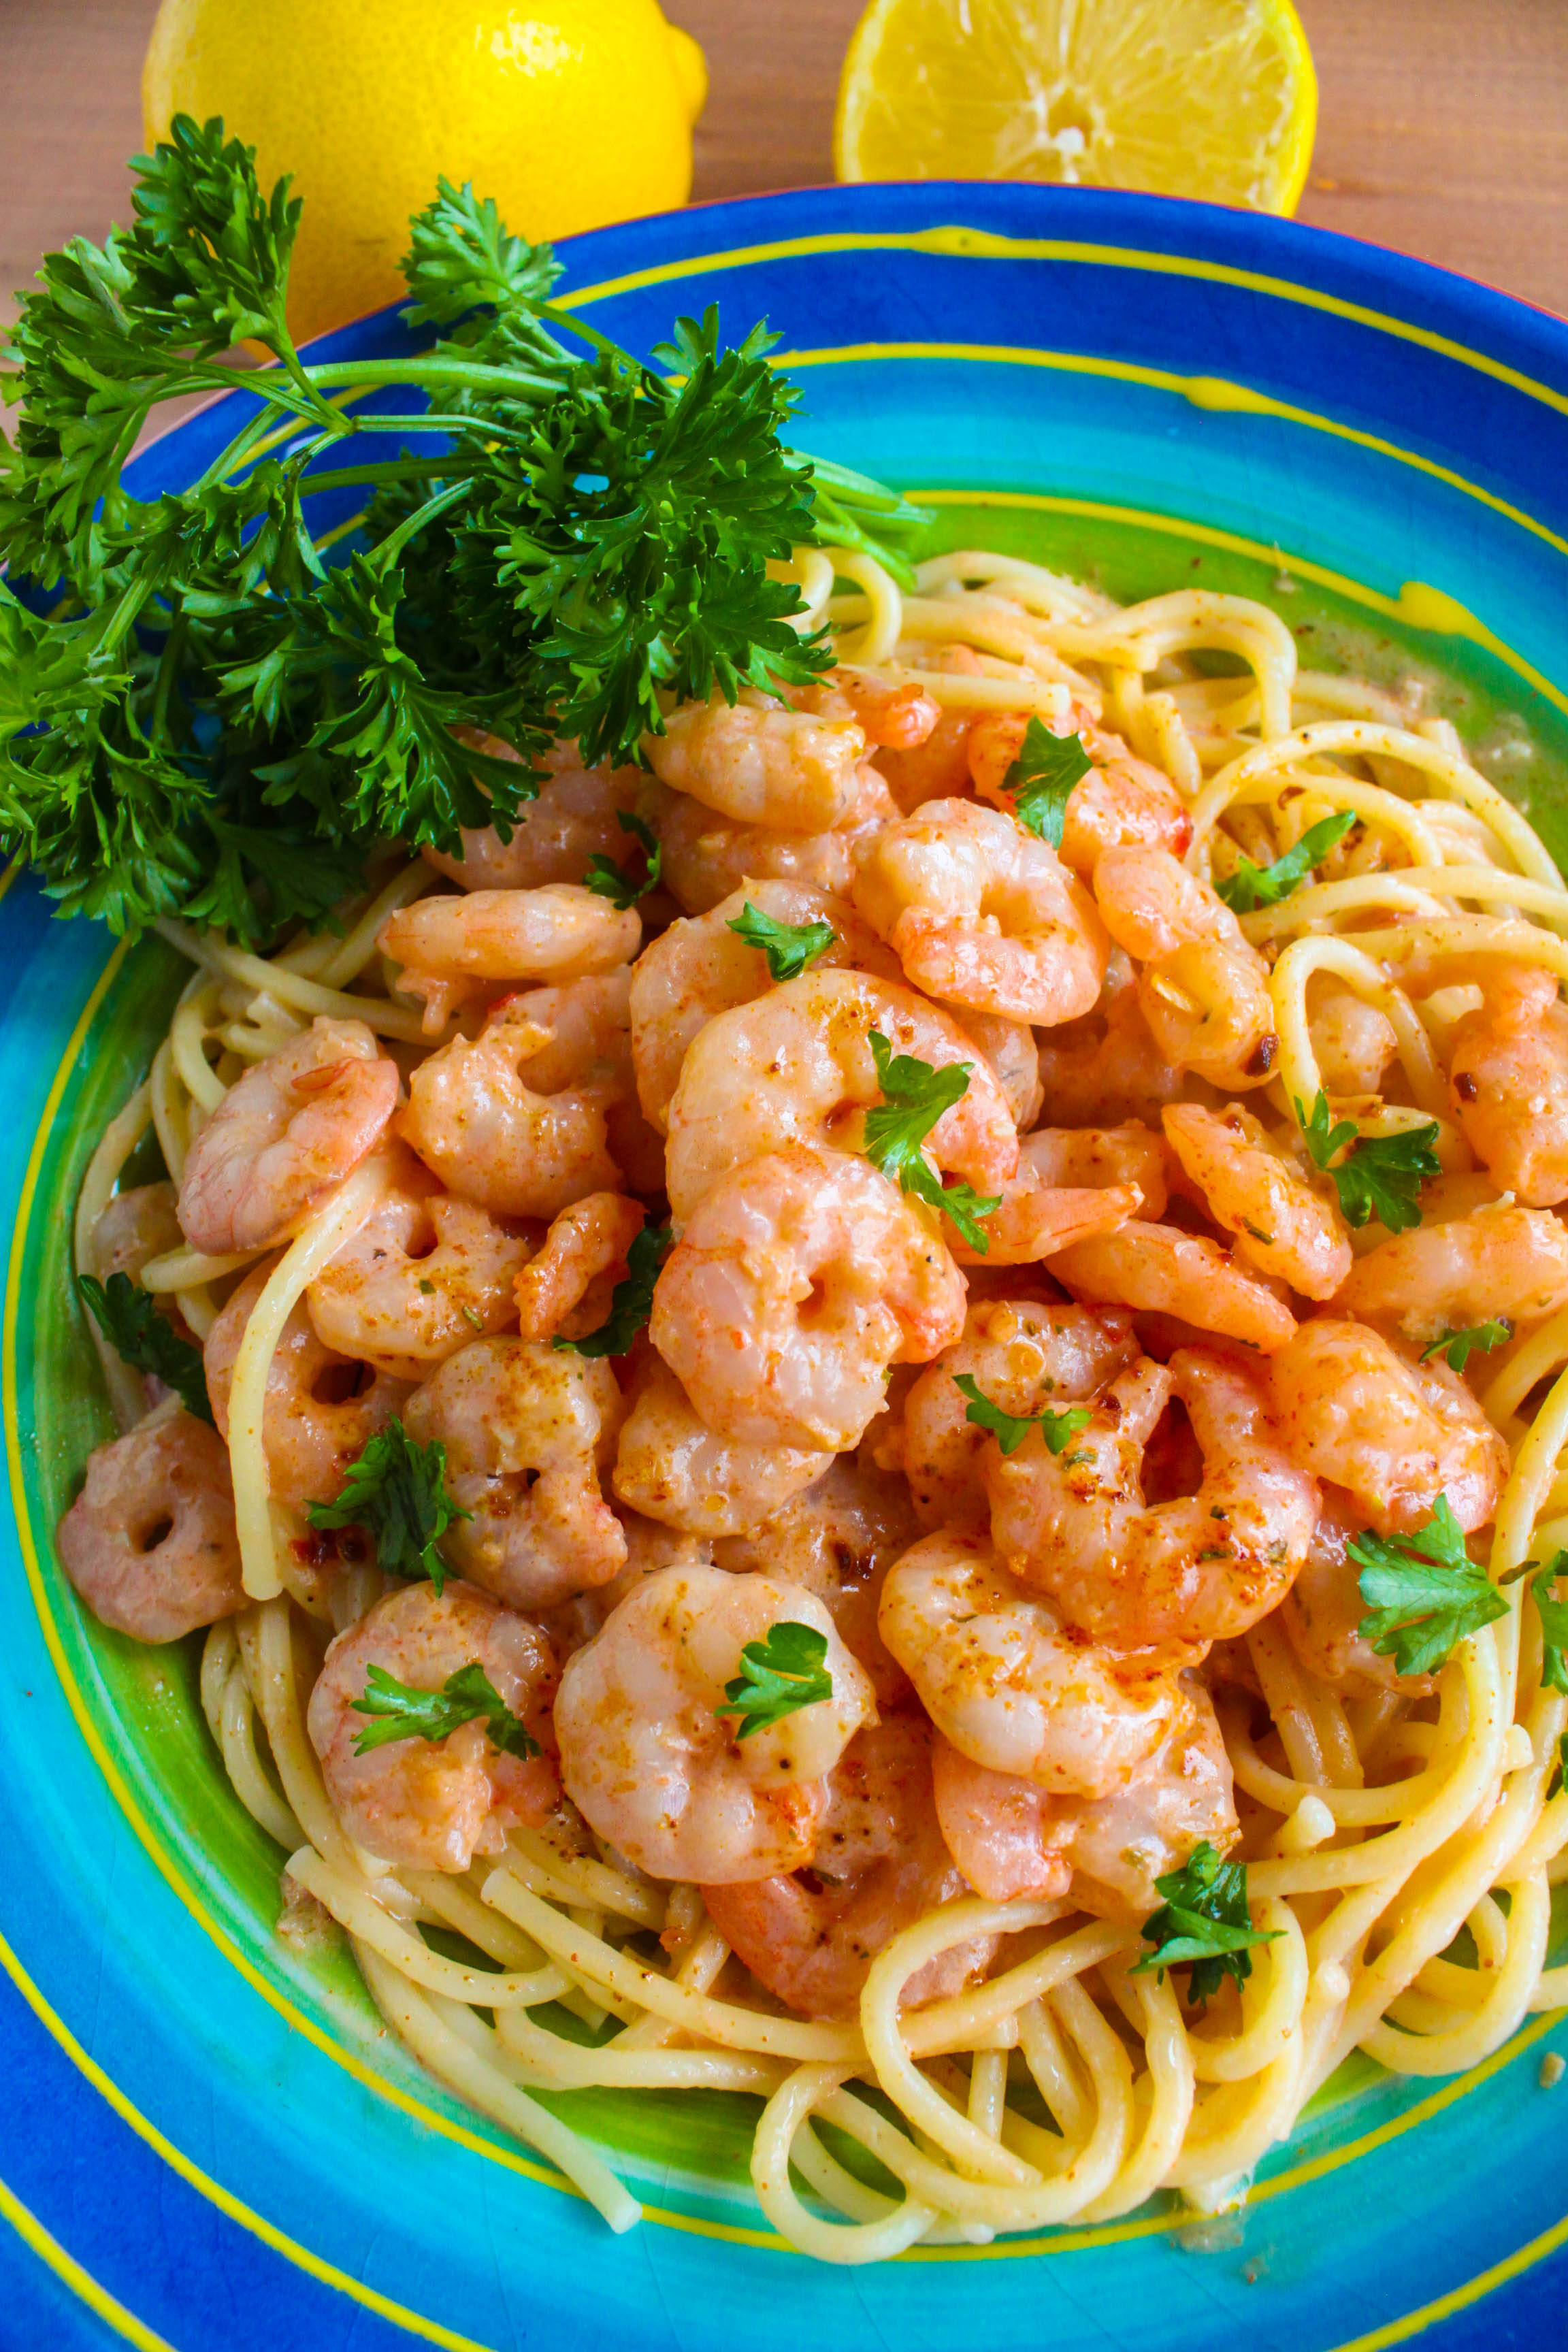 Spicy Shrimp in a Creamy Seafood Sauce